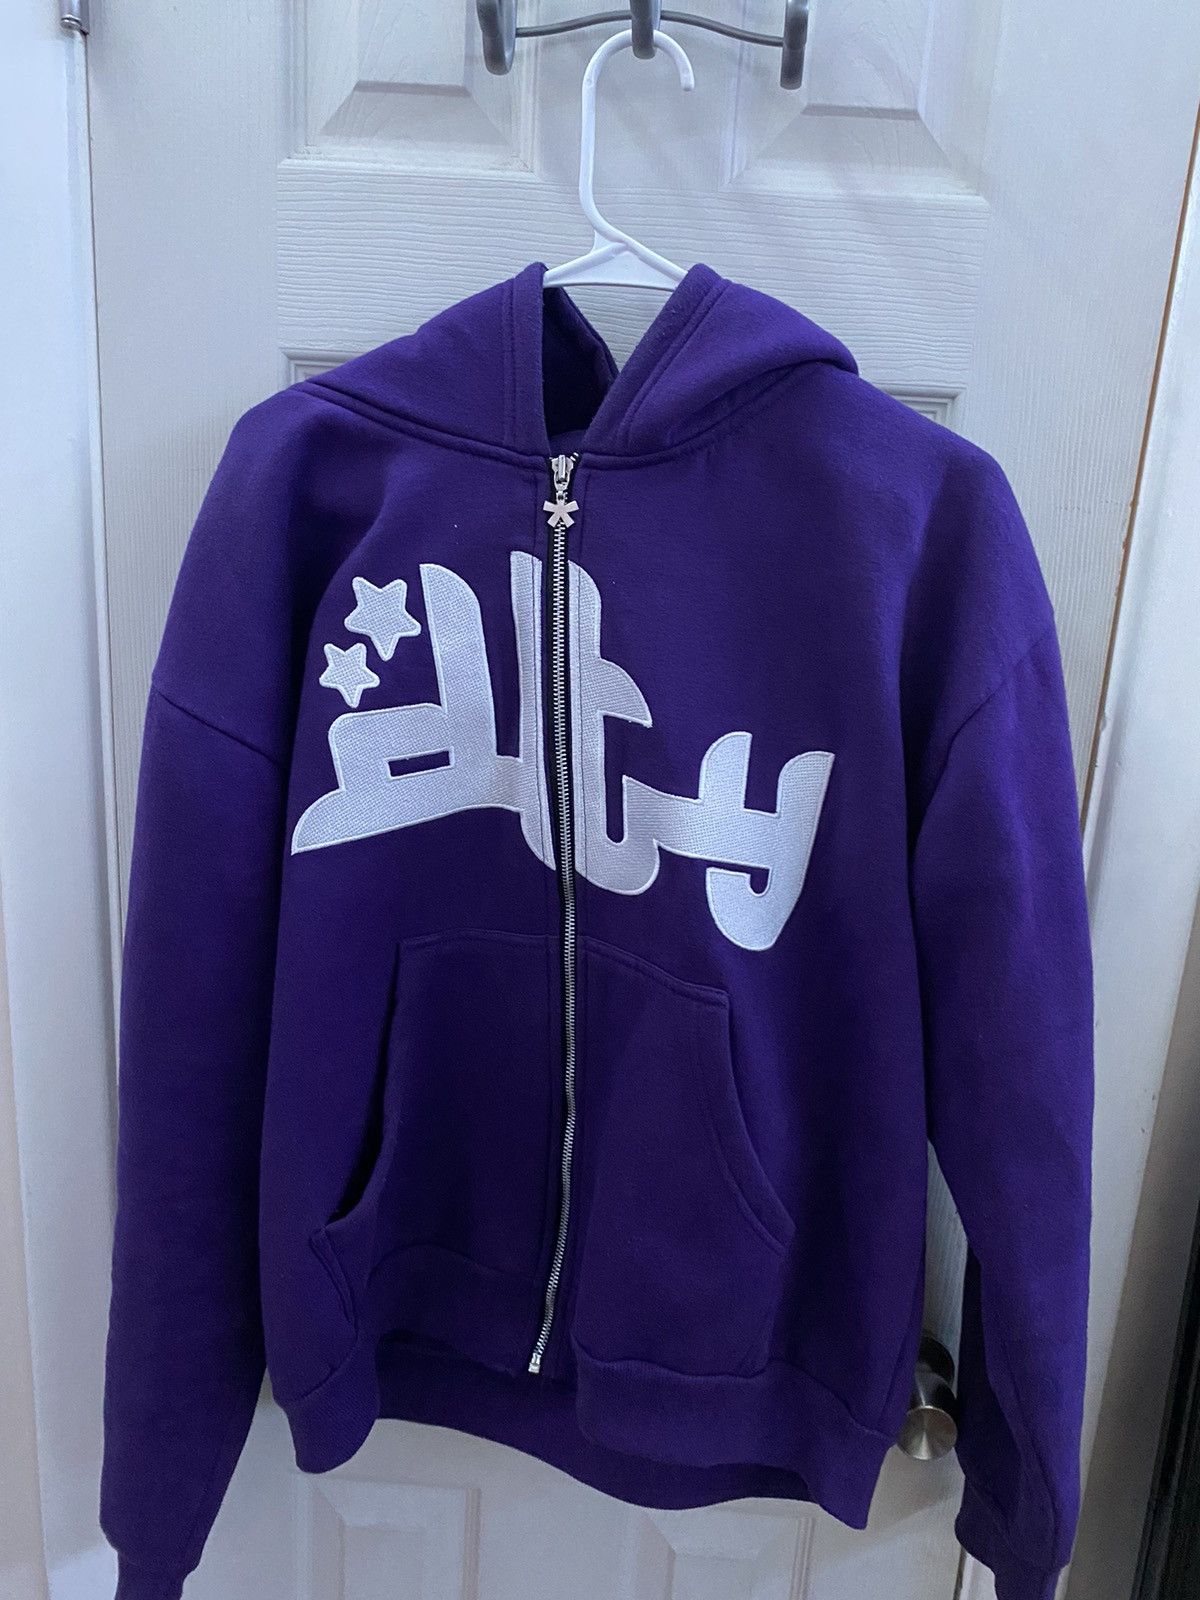 Divide The Youth Divide The Youth Purple Zip Up hoodie | Grailed